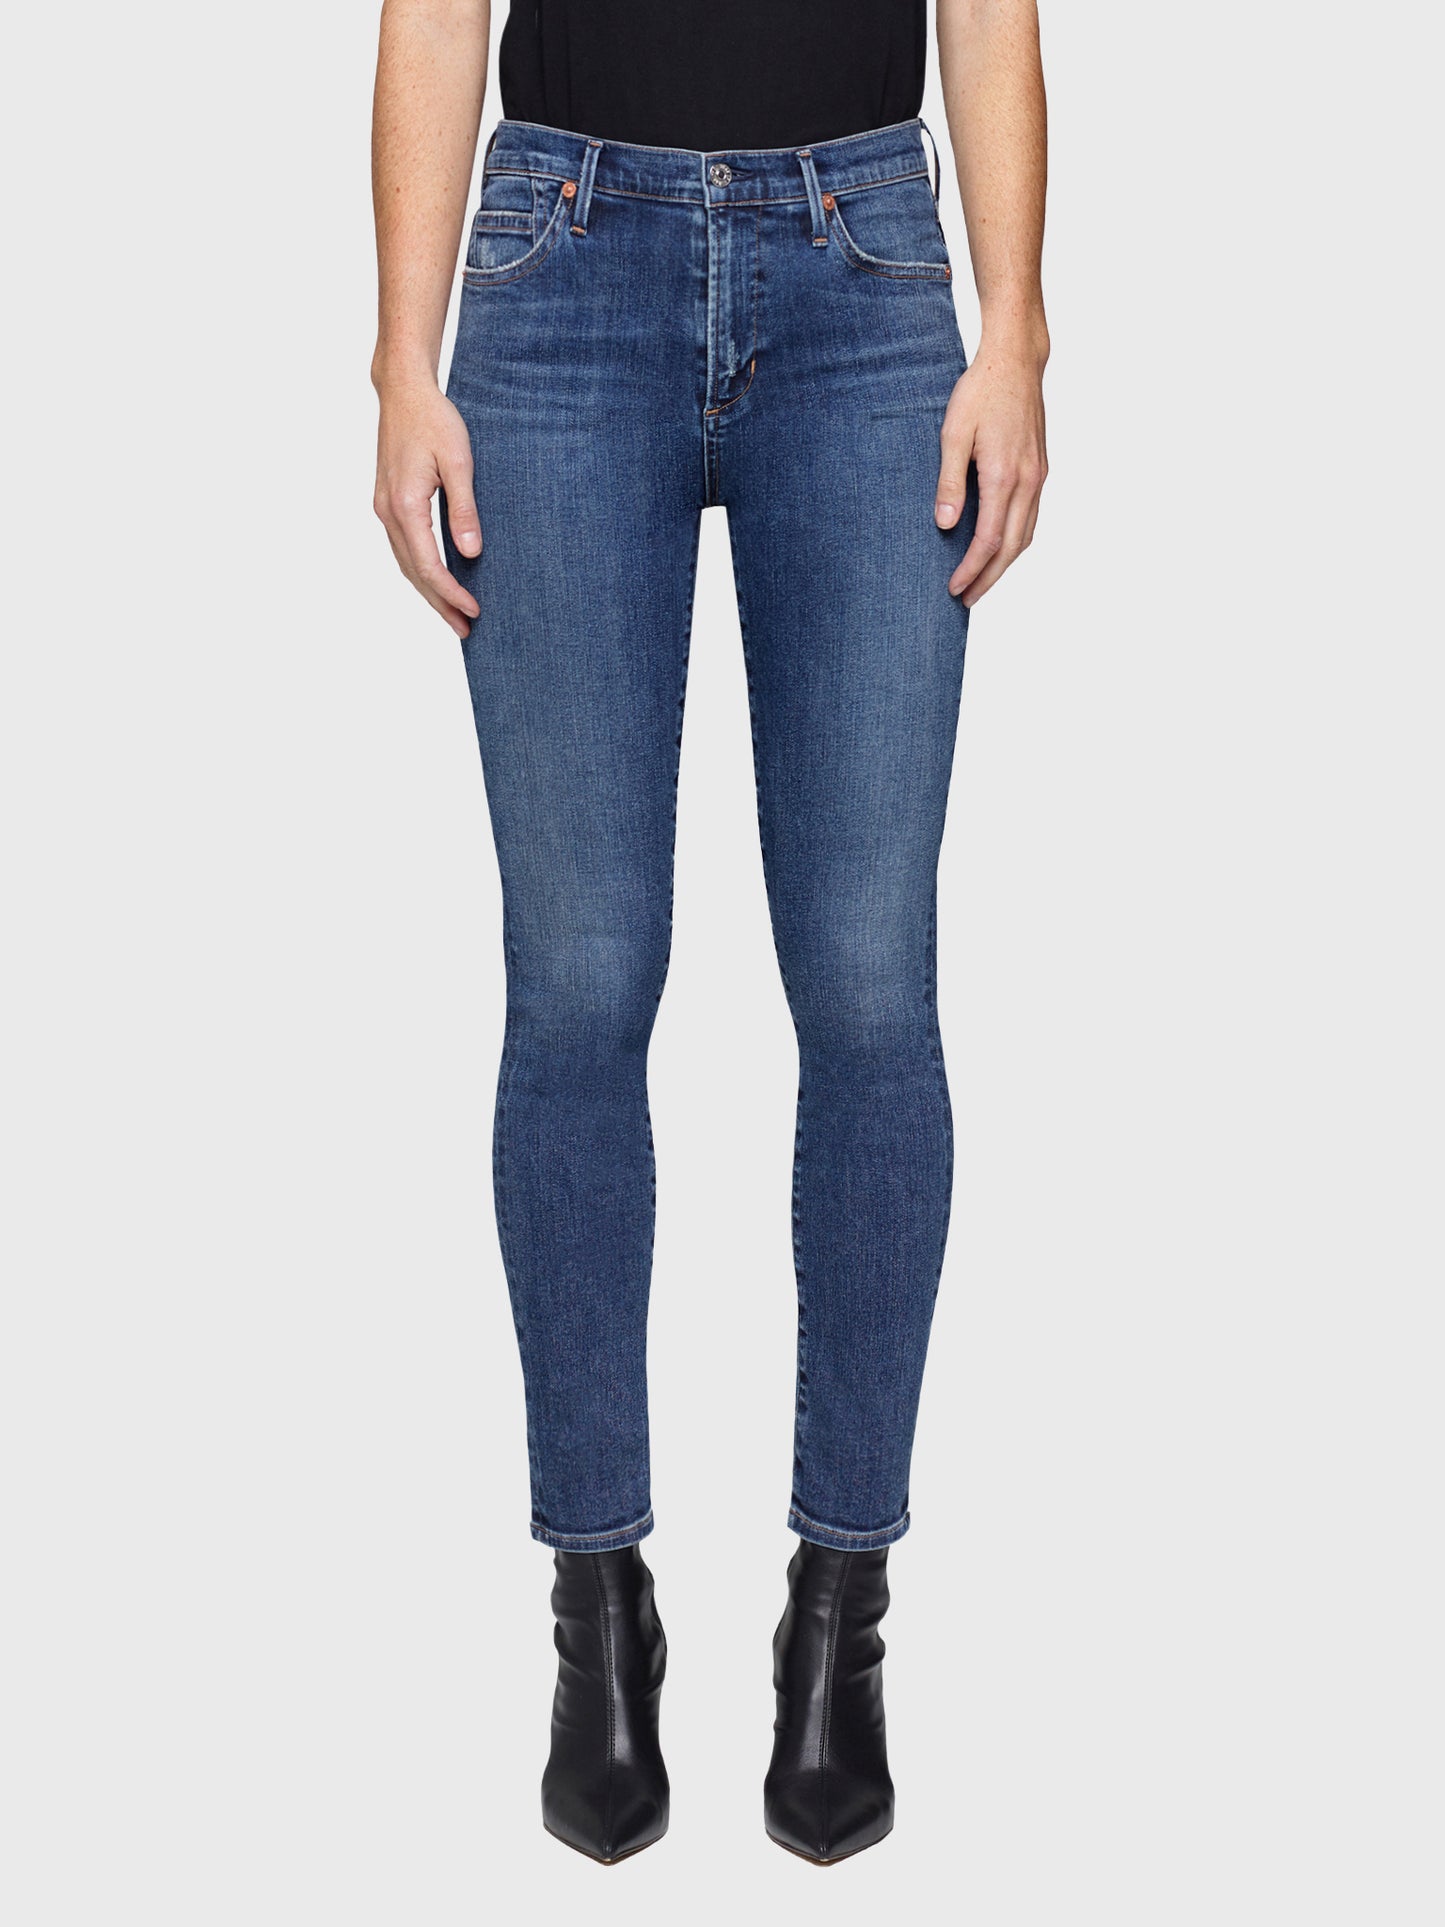 Citizens Of Humanity Women's Rocket Mid-Rise Skinny Jean